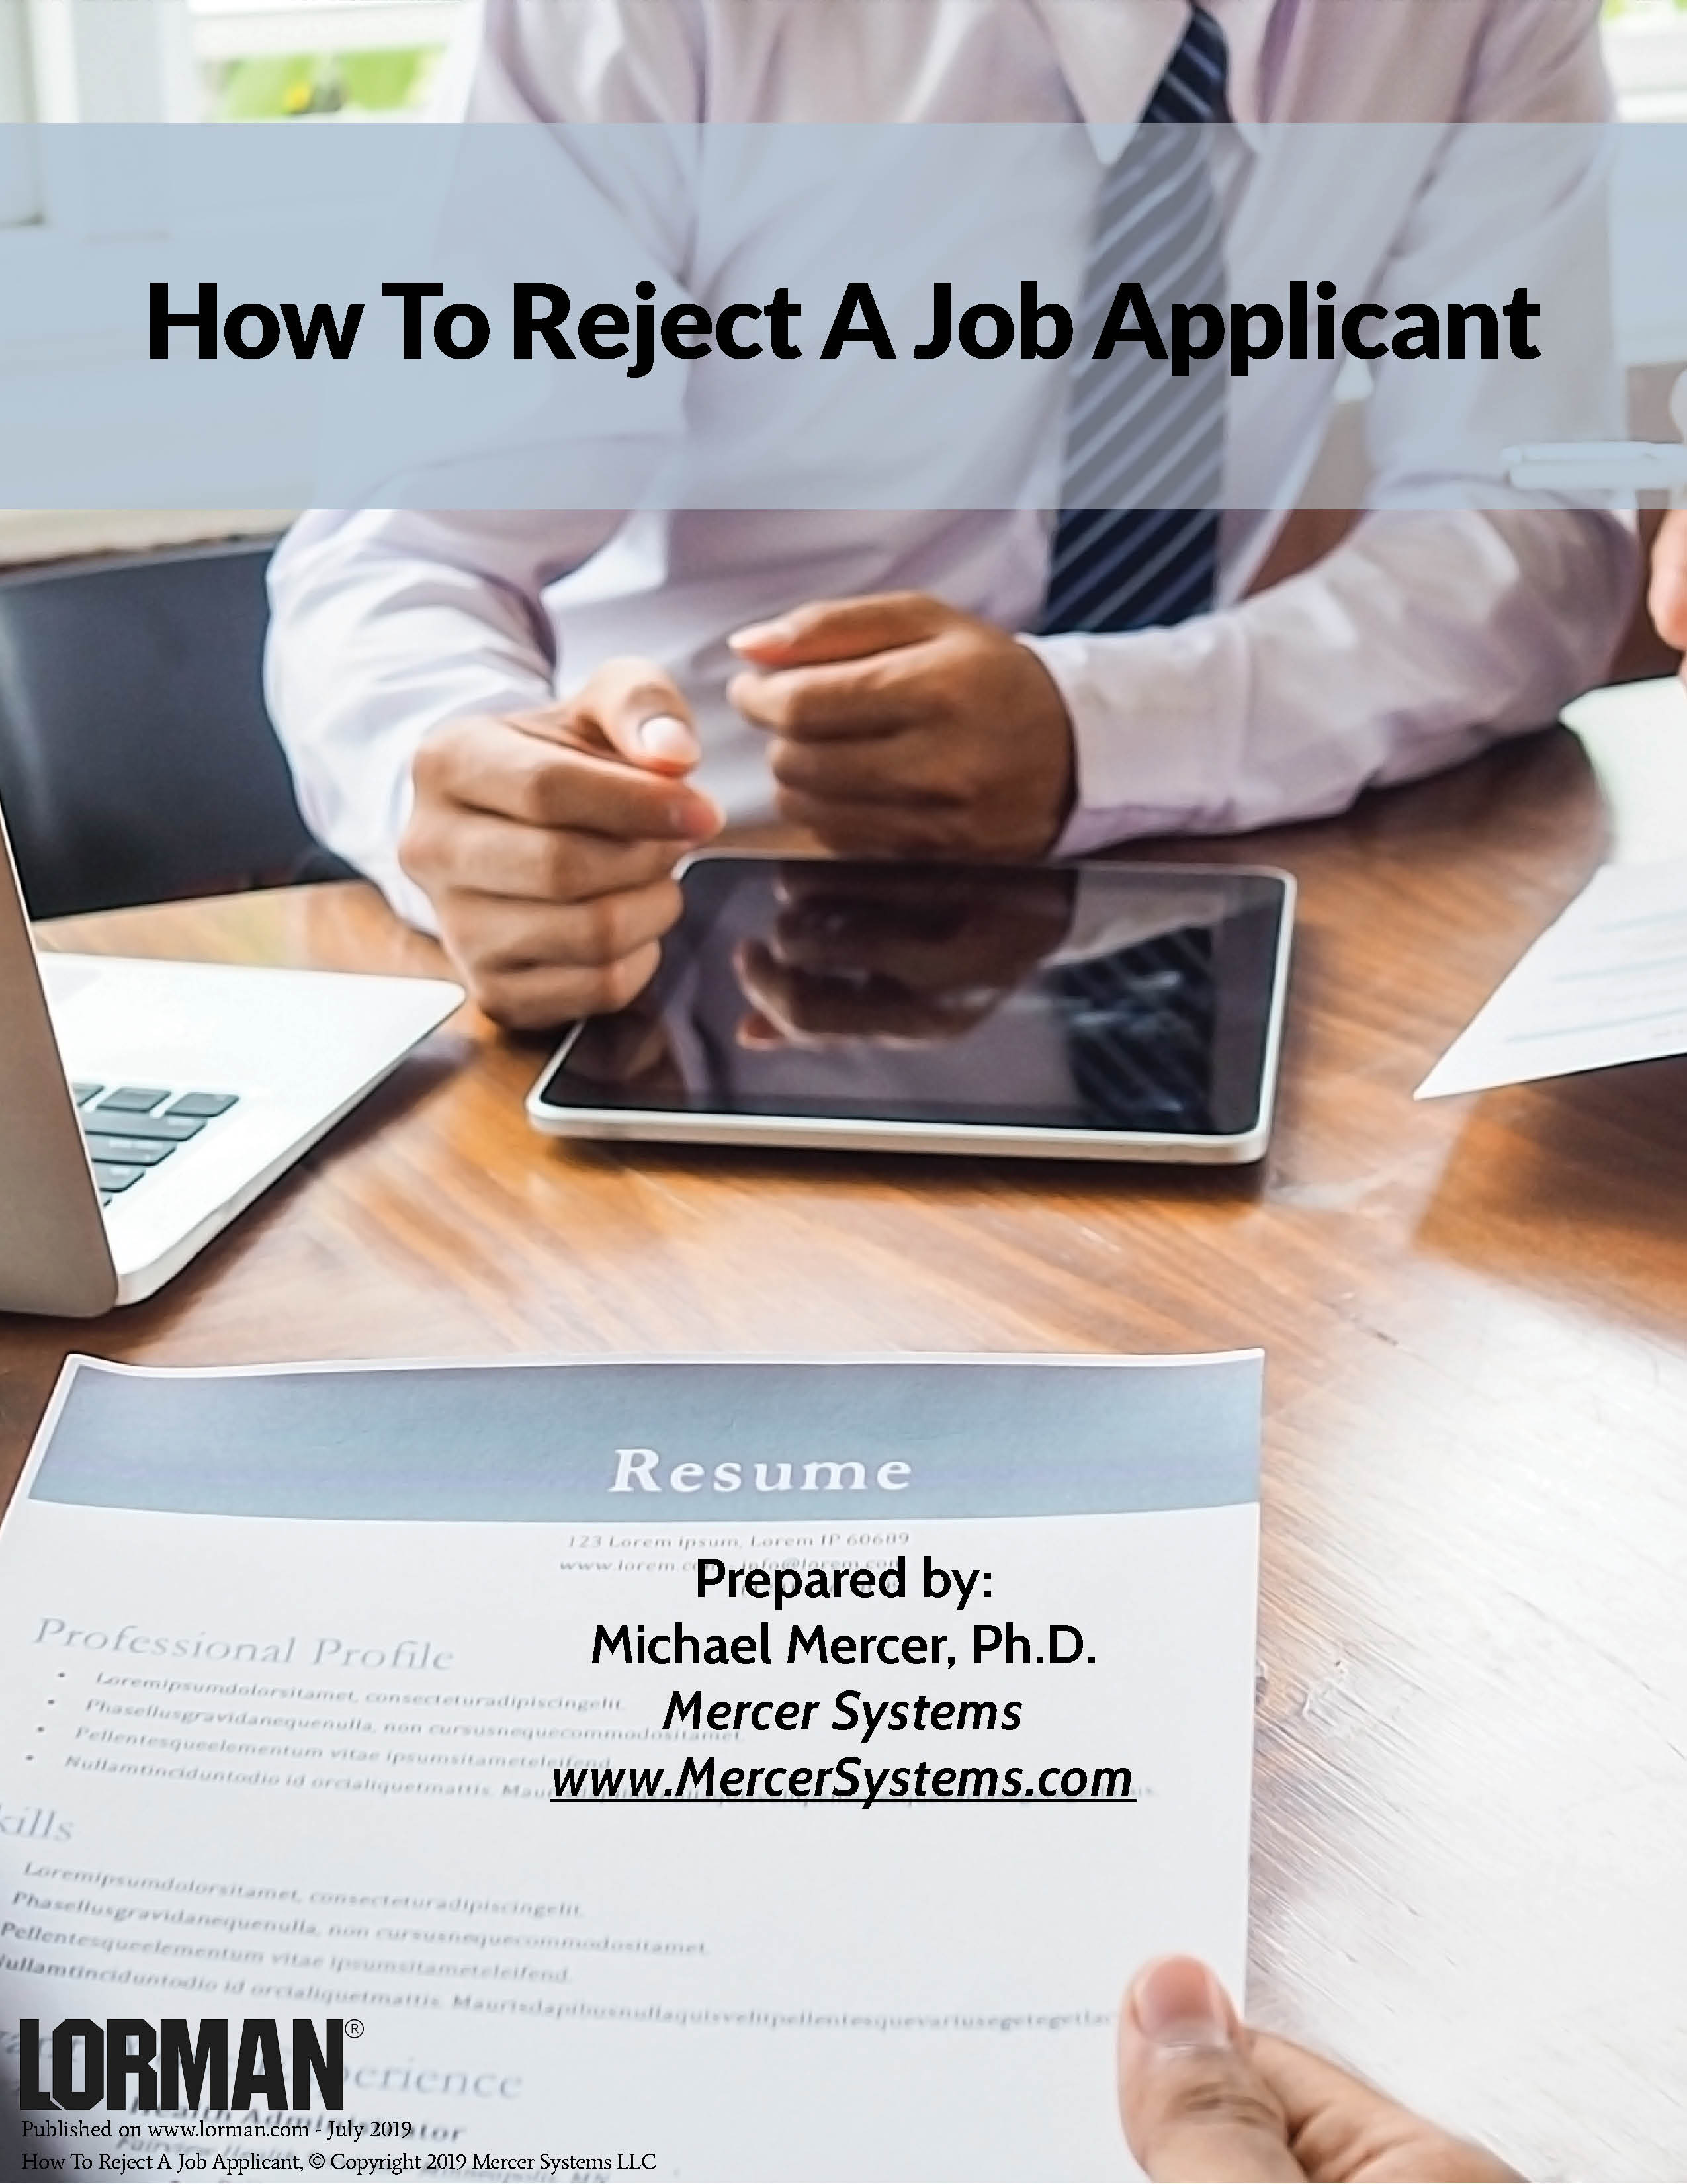 How to Reject a Job Applicant